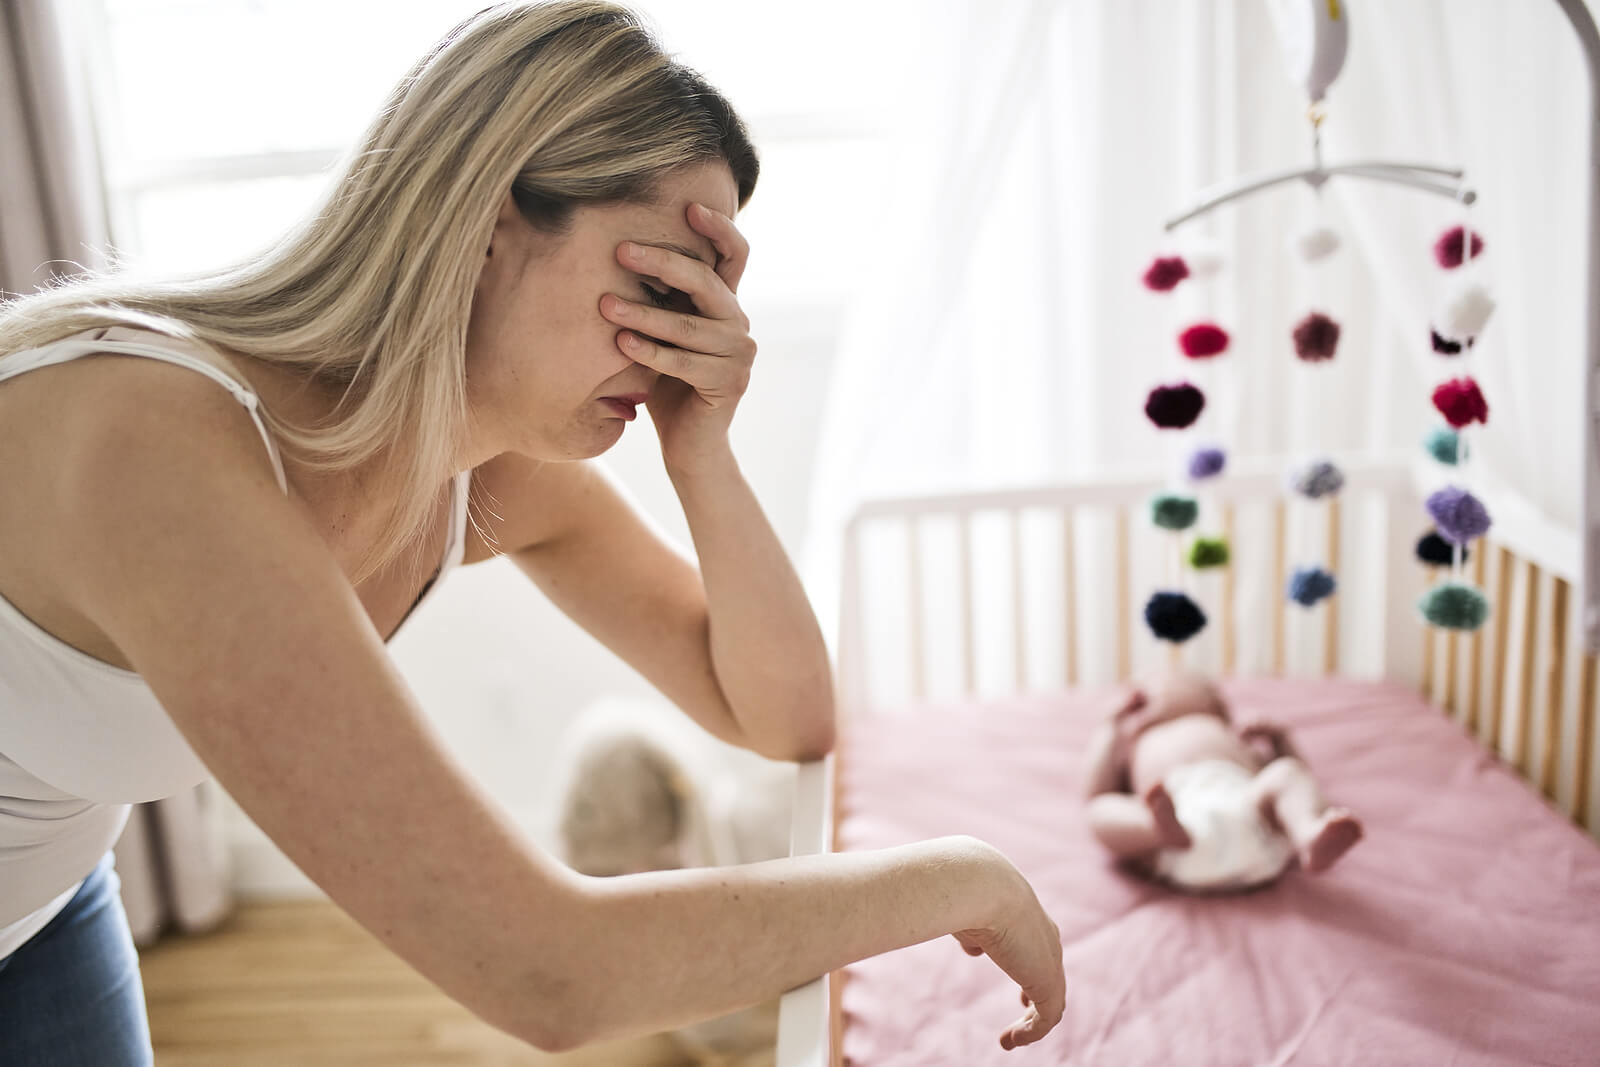 A mother with postpartum depression crying by her baby's crib.